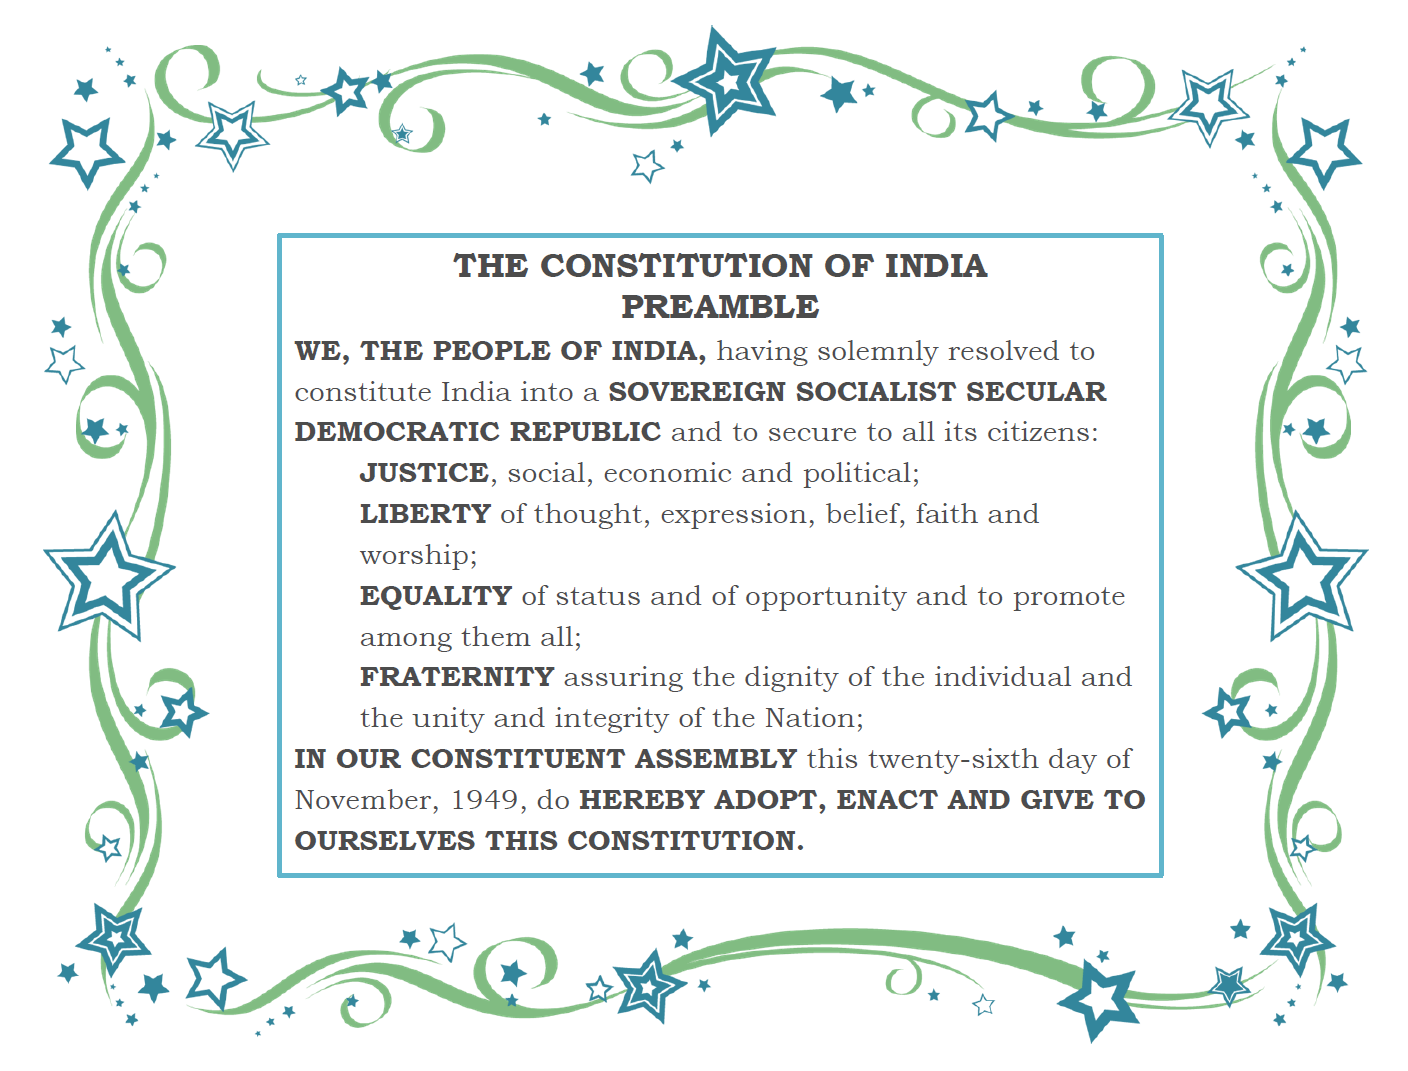 essay on importance of preamble to the constitution